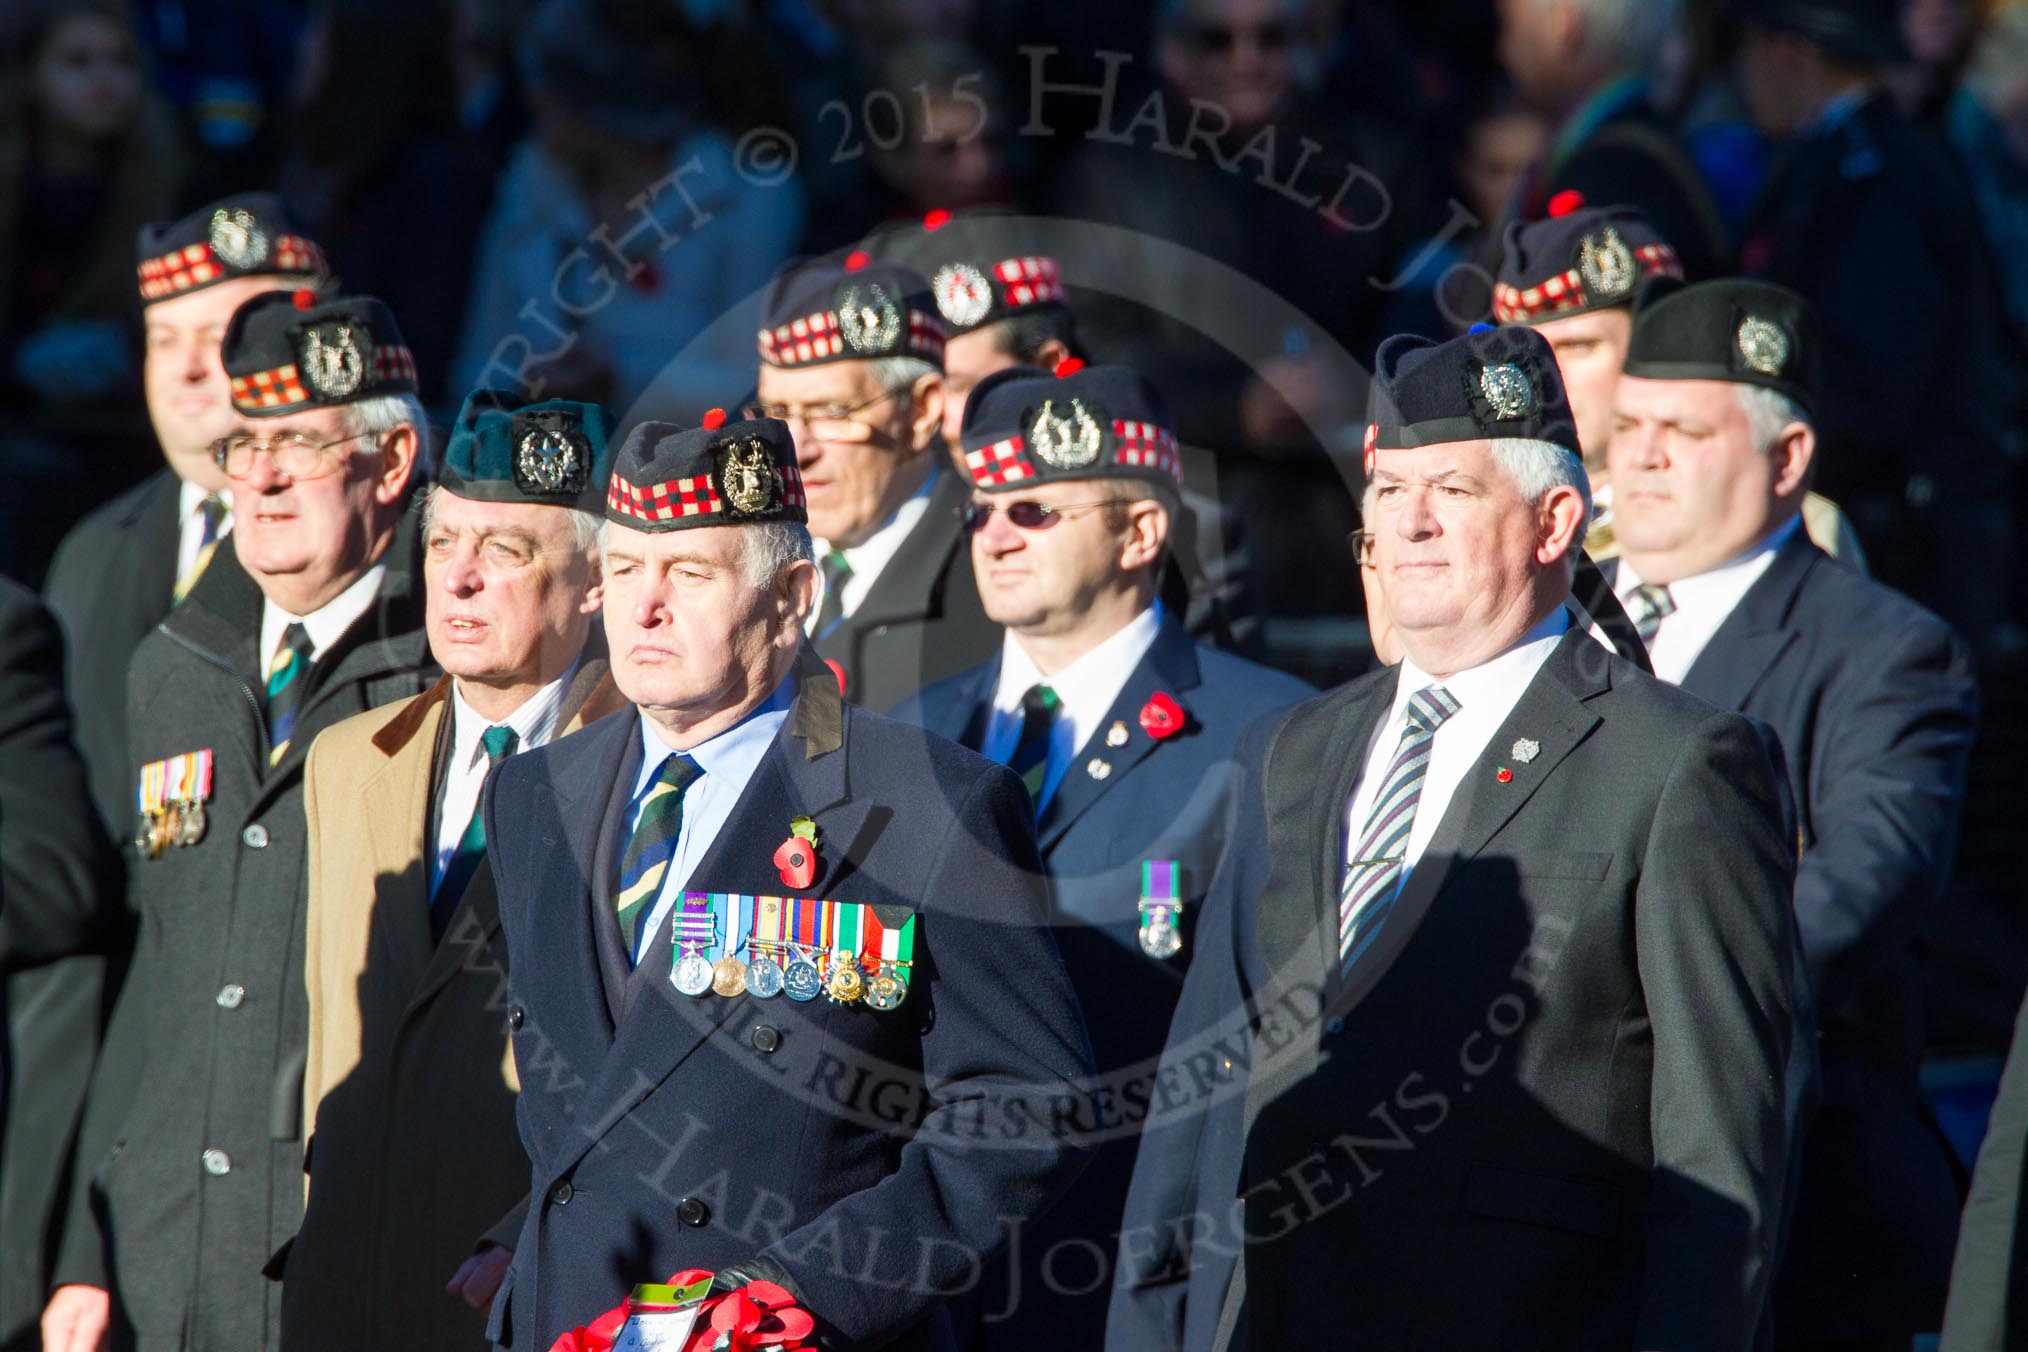 Remembrance Sunday Cenotaph March Past 2013: A22 - Gordon Highlanders Association..
Press stand opposite the Foreign Office building, Whitehall, London SW1,
London,
Greater London,
United Kingdom,
on 10 November 2013 at 11:57, image #1215